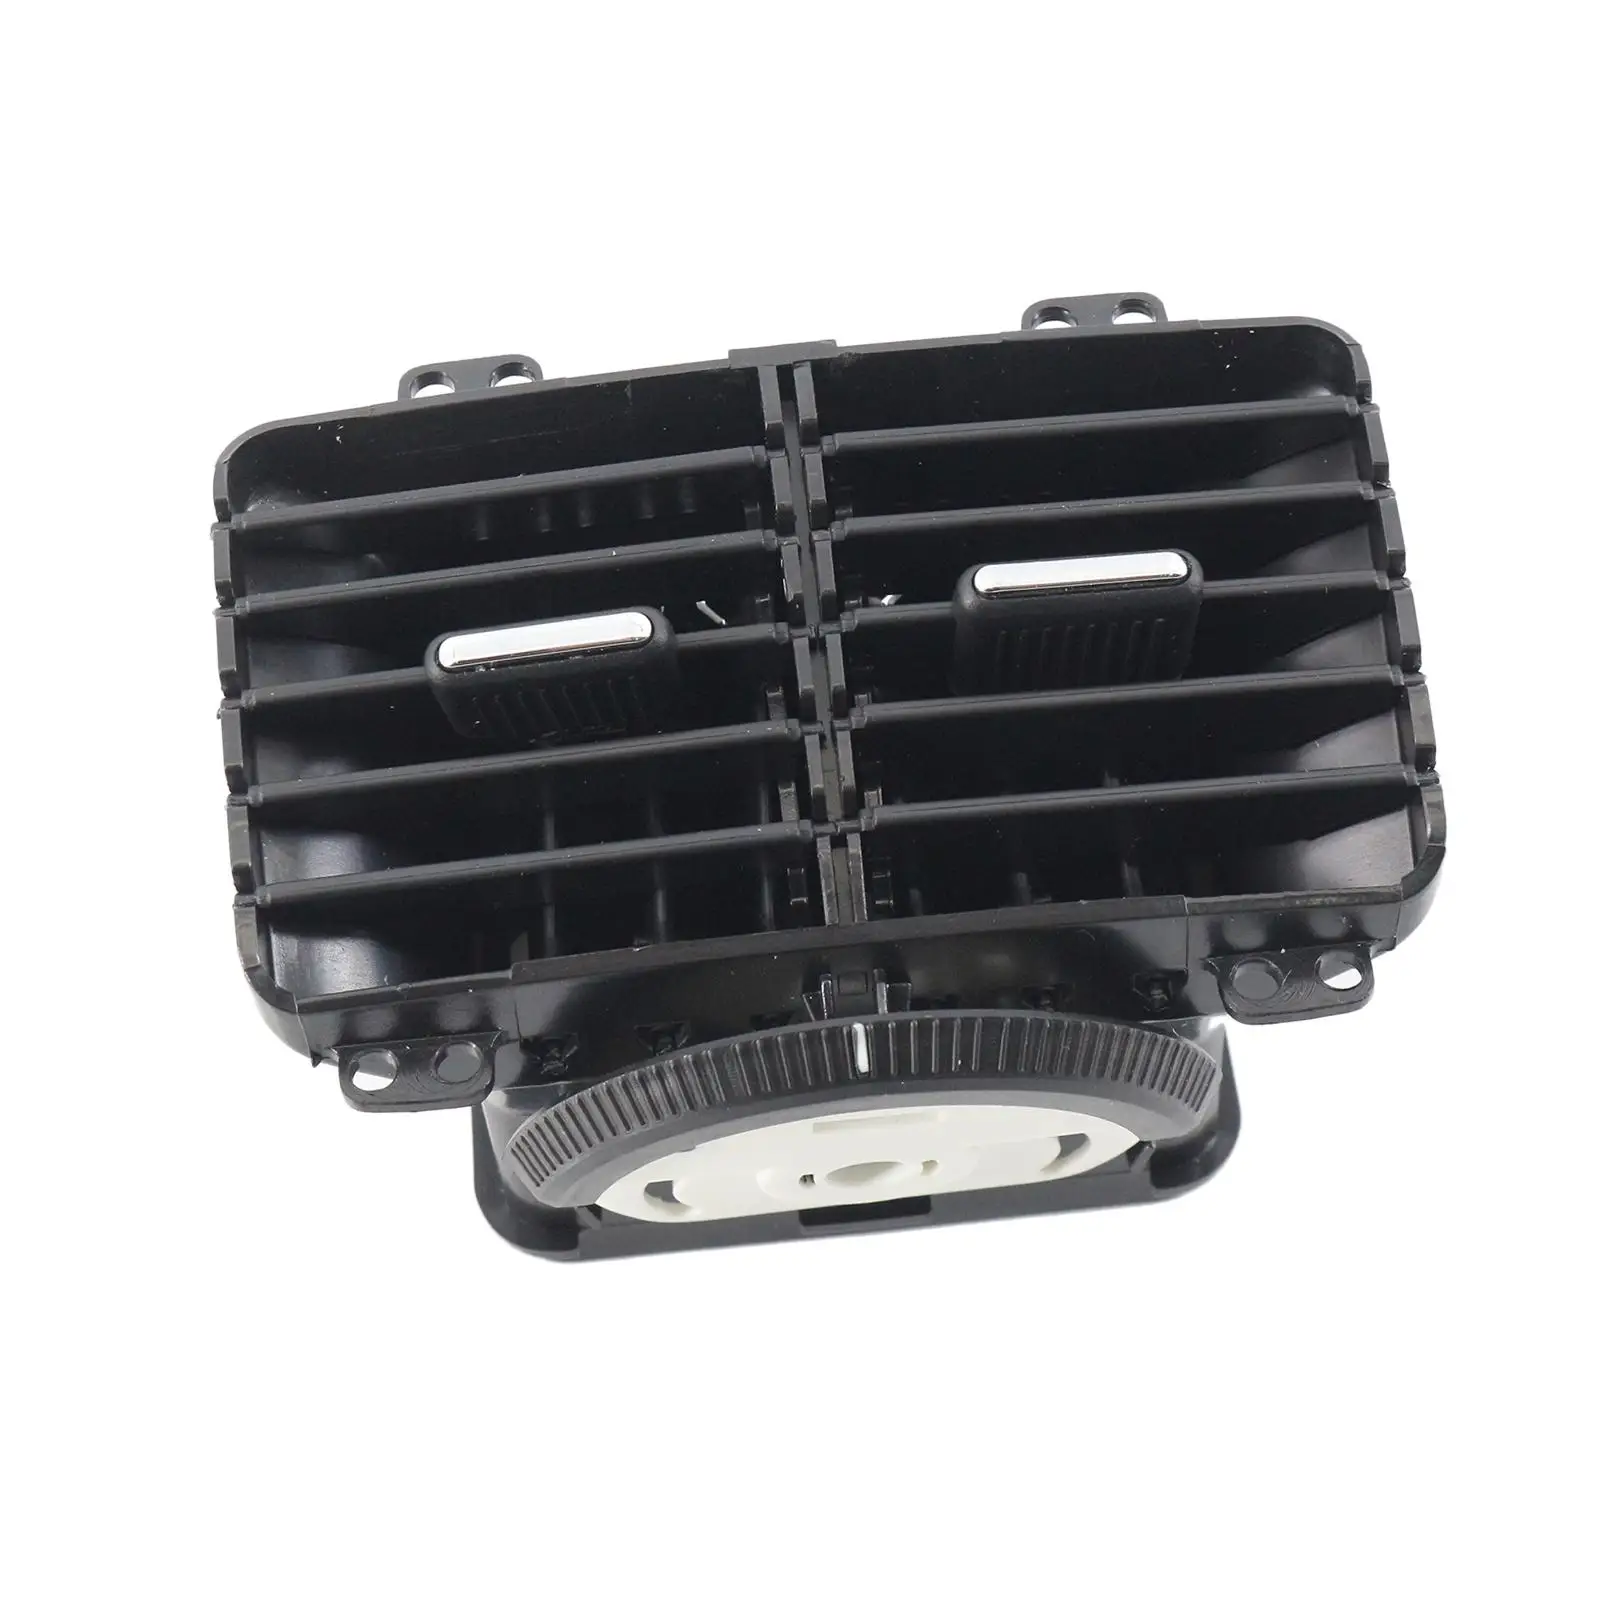 Car Rear Centre Console Air Vent for VW Golf MK5 MK6 Jetta GTI Replace Parts